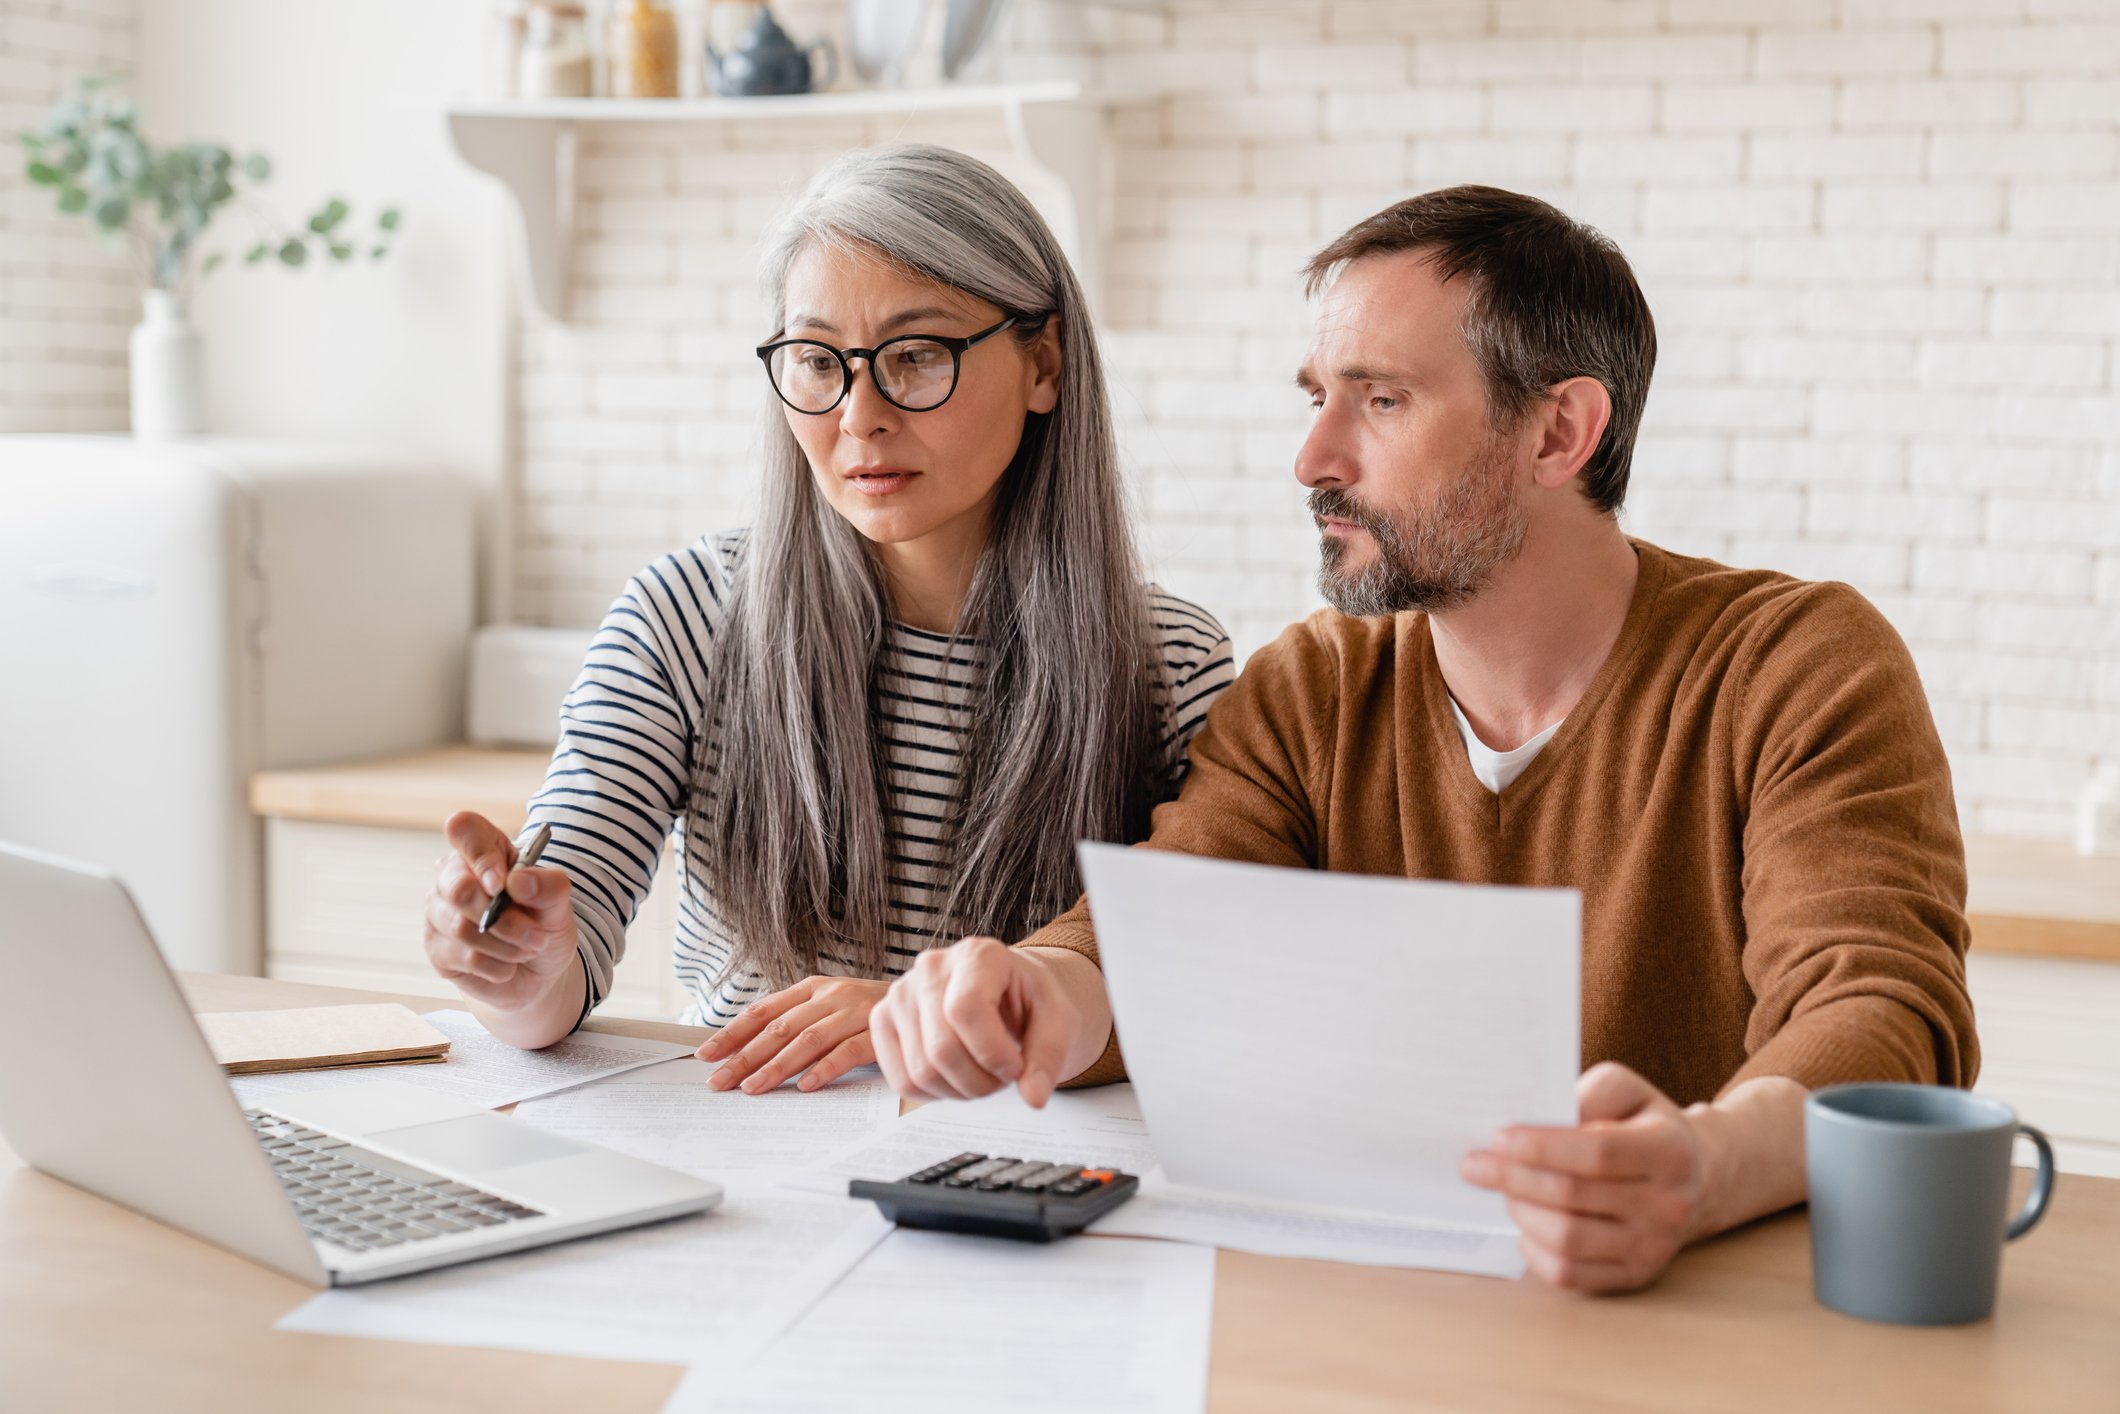 B.A. Schrock Financial Group | 2 Ways the 2022 Economic Woes Affected Your Retirement Accounts